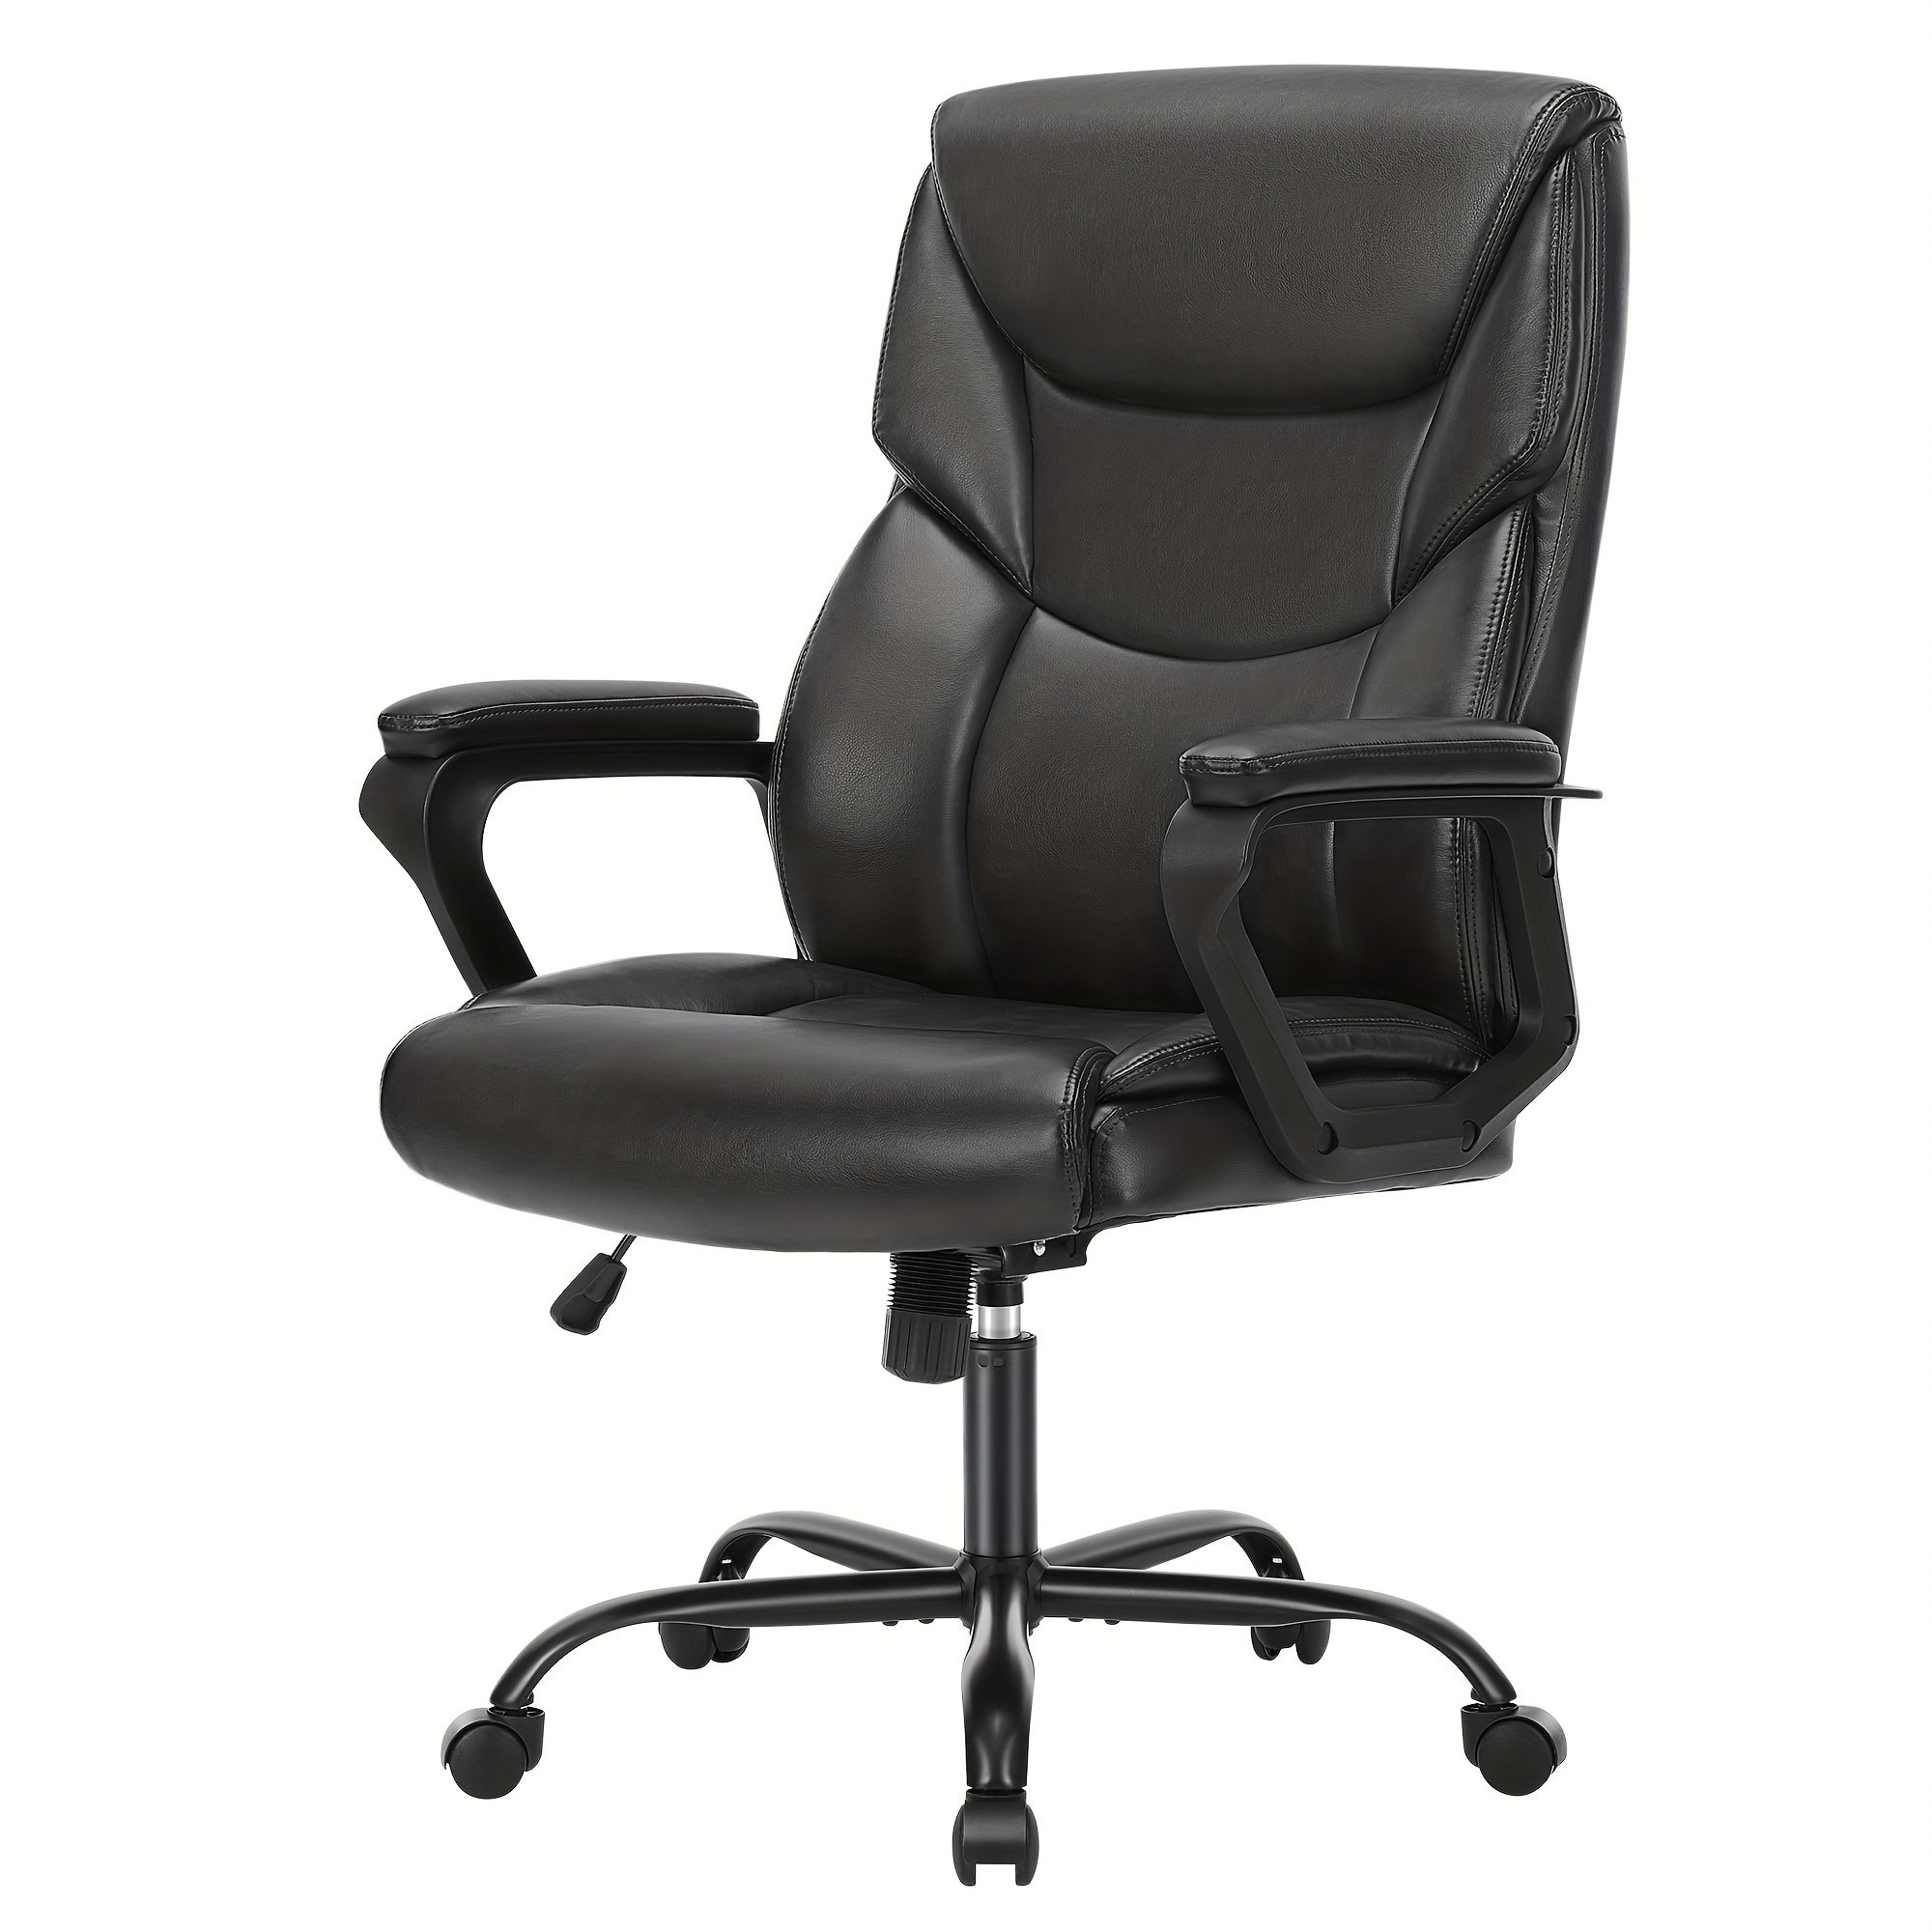 

Home Office Chair Computer Gaming Chair, Ergonomic Padded Armrest, Lumbar Support, Swivel Rolling Leather Desk Chair With Wheels